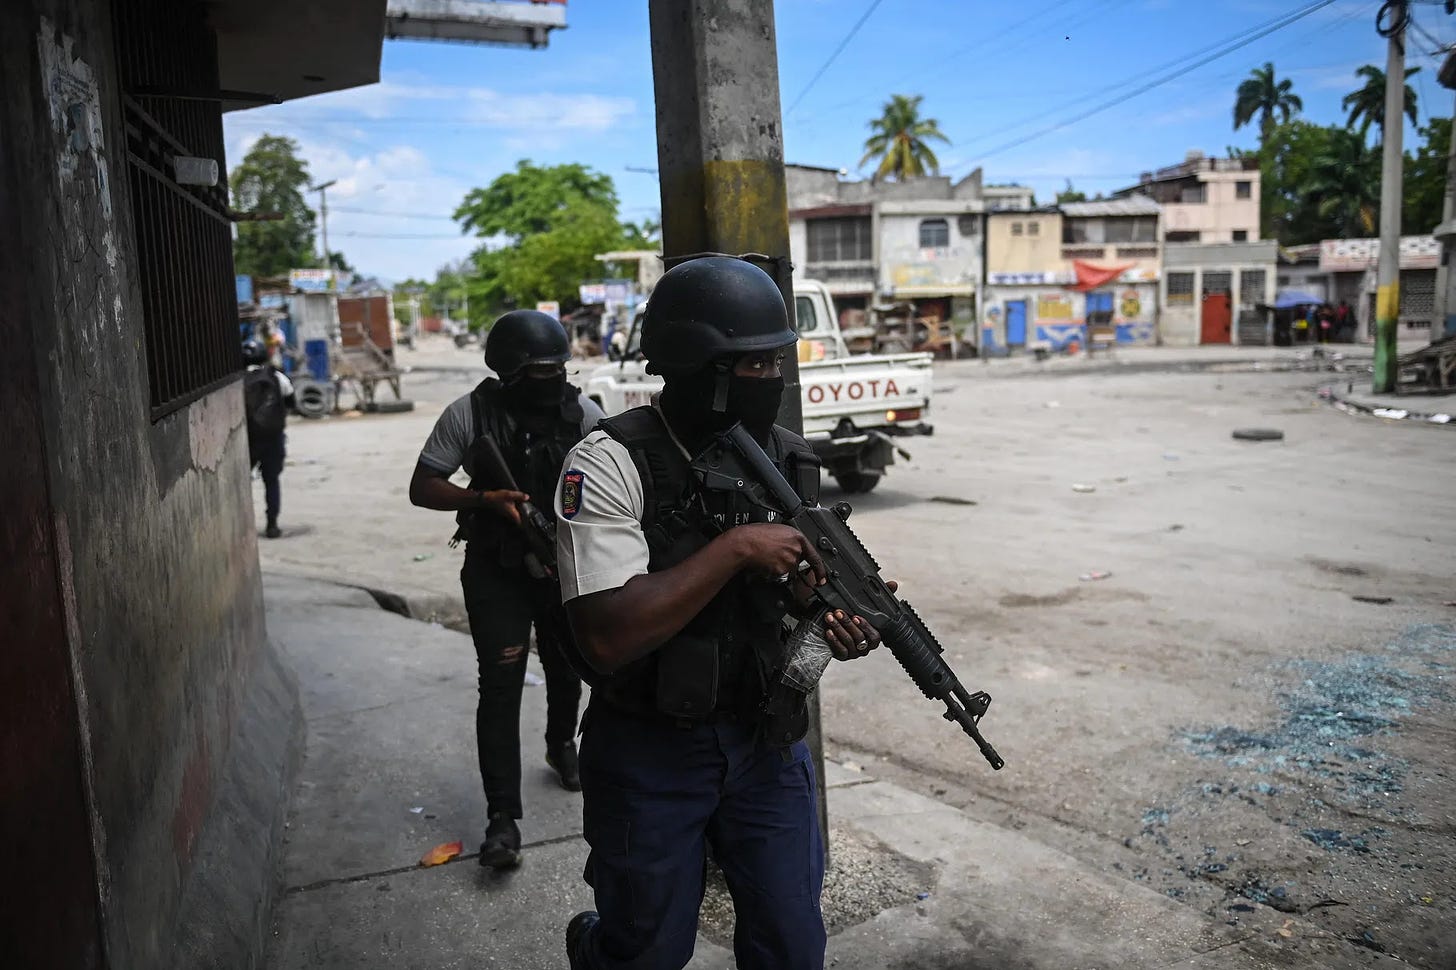 The UN authorized a multilateral intervention in Haiti to help train and support the island nation’s police, pictured here in April, in combatting gang-related violence.